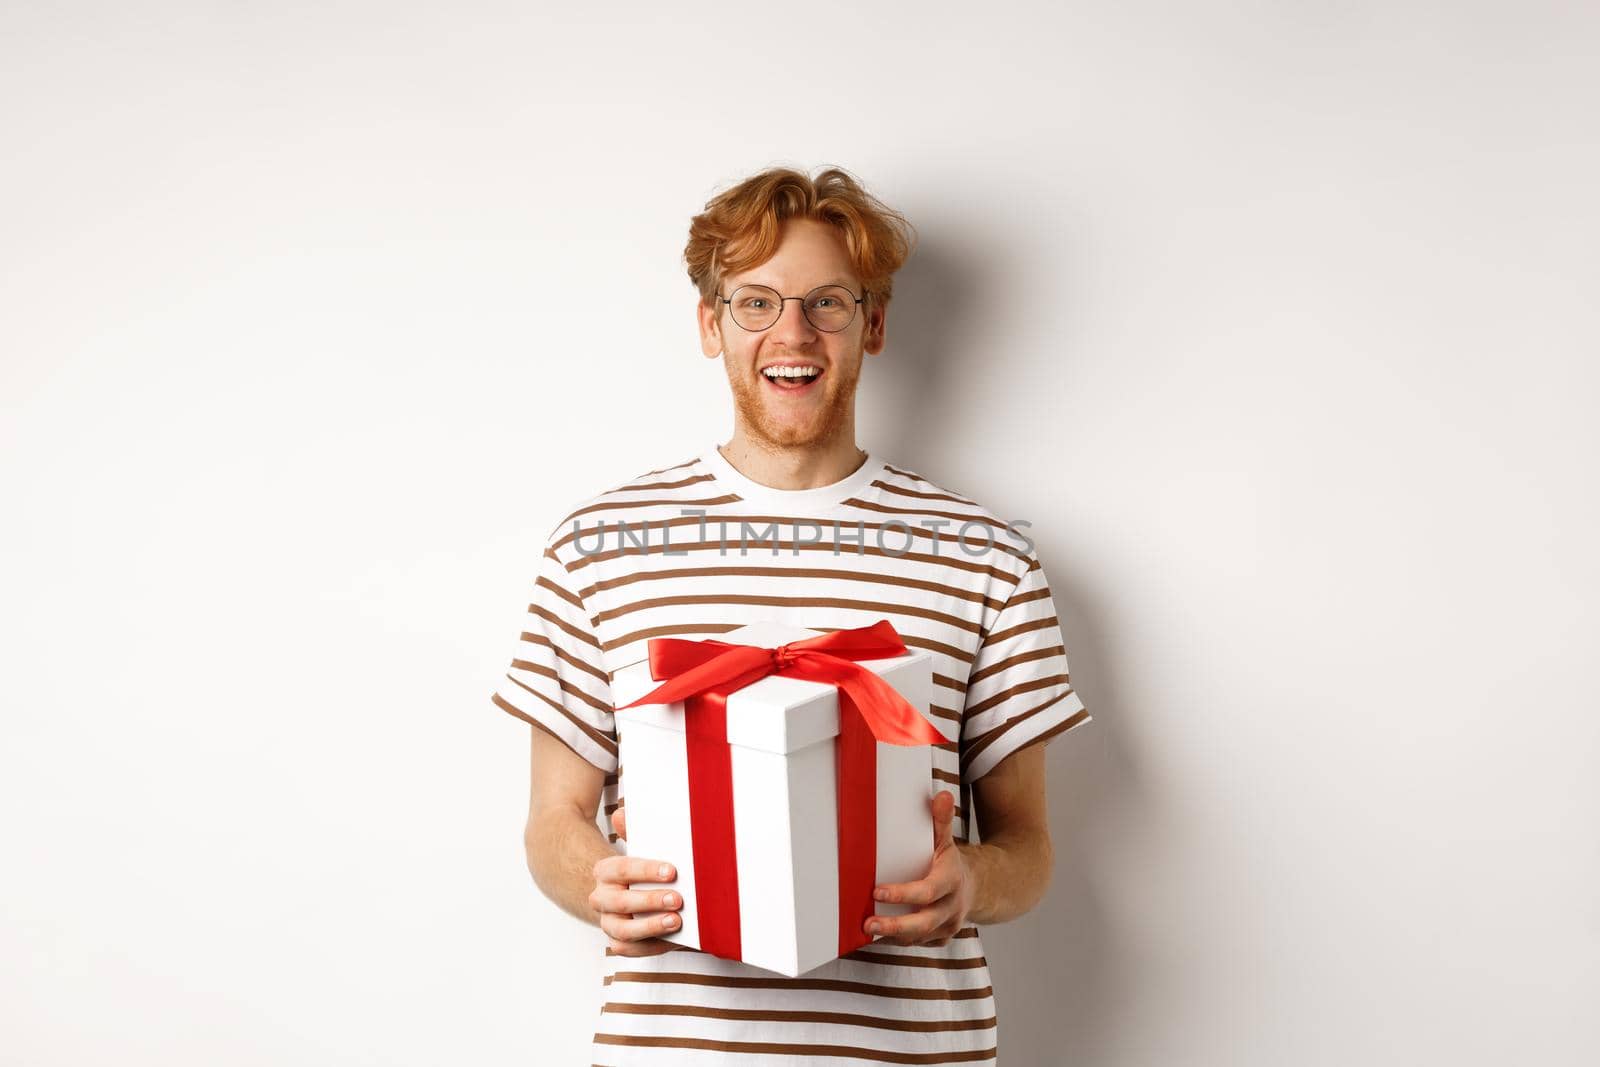 Valentines day and holidays concept. Cheerful young man holding gift box and smiling grateful, receiving presents, standing over white background.